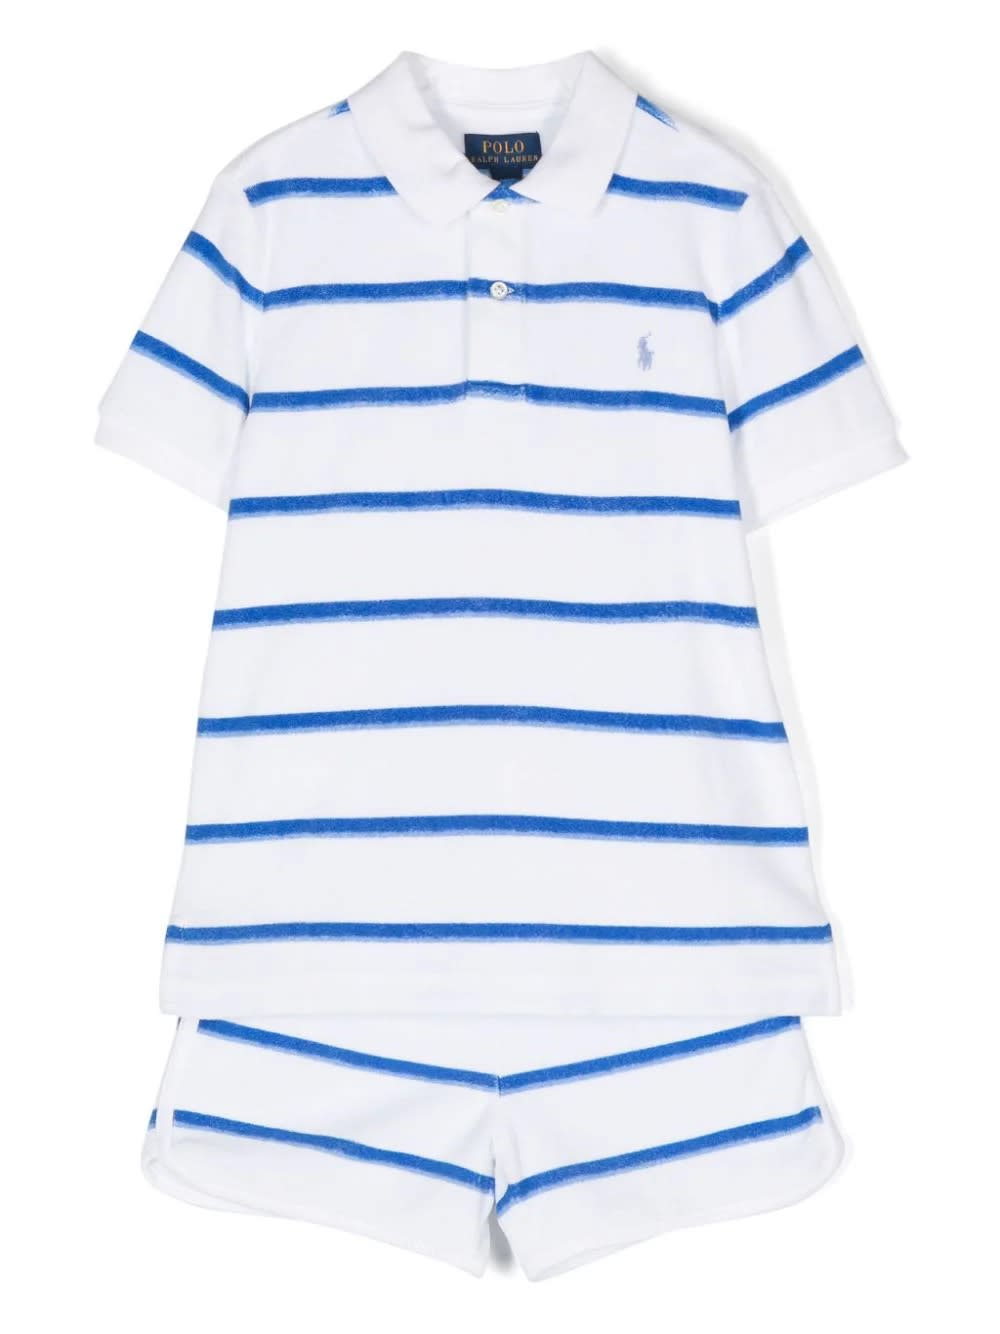 Ralph Lauren Kids' Blue And White Striped Set With Pony